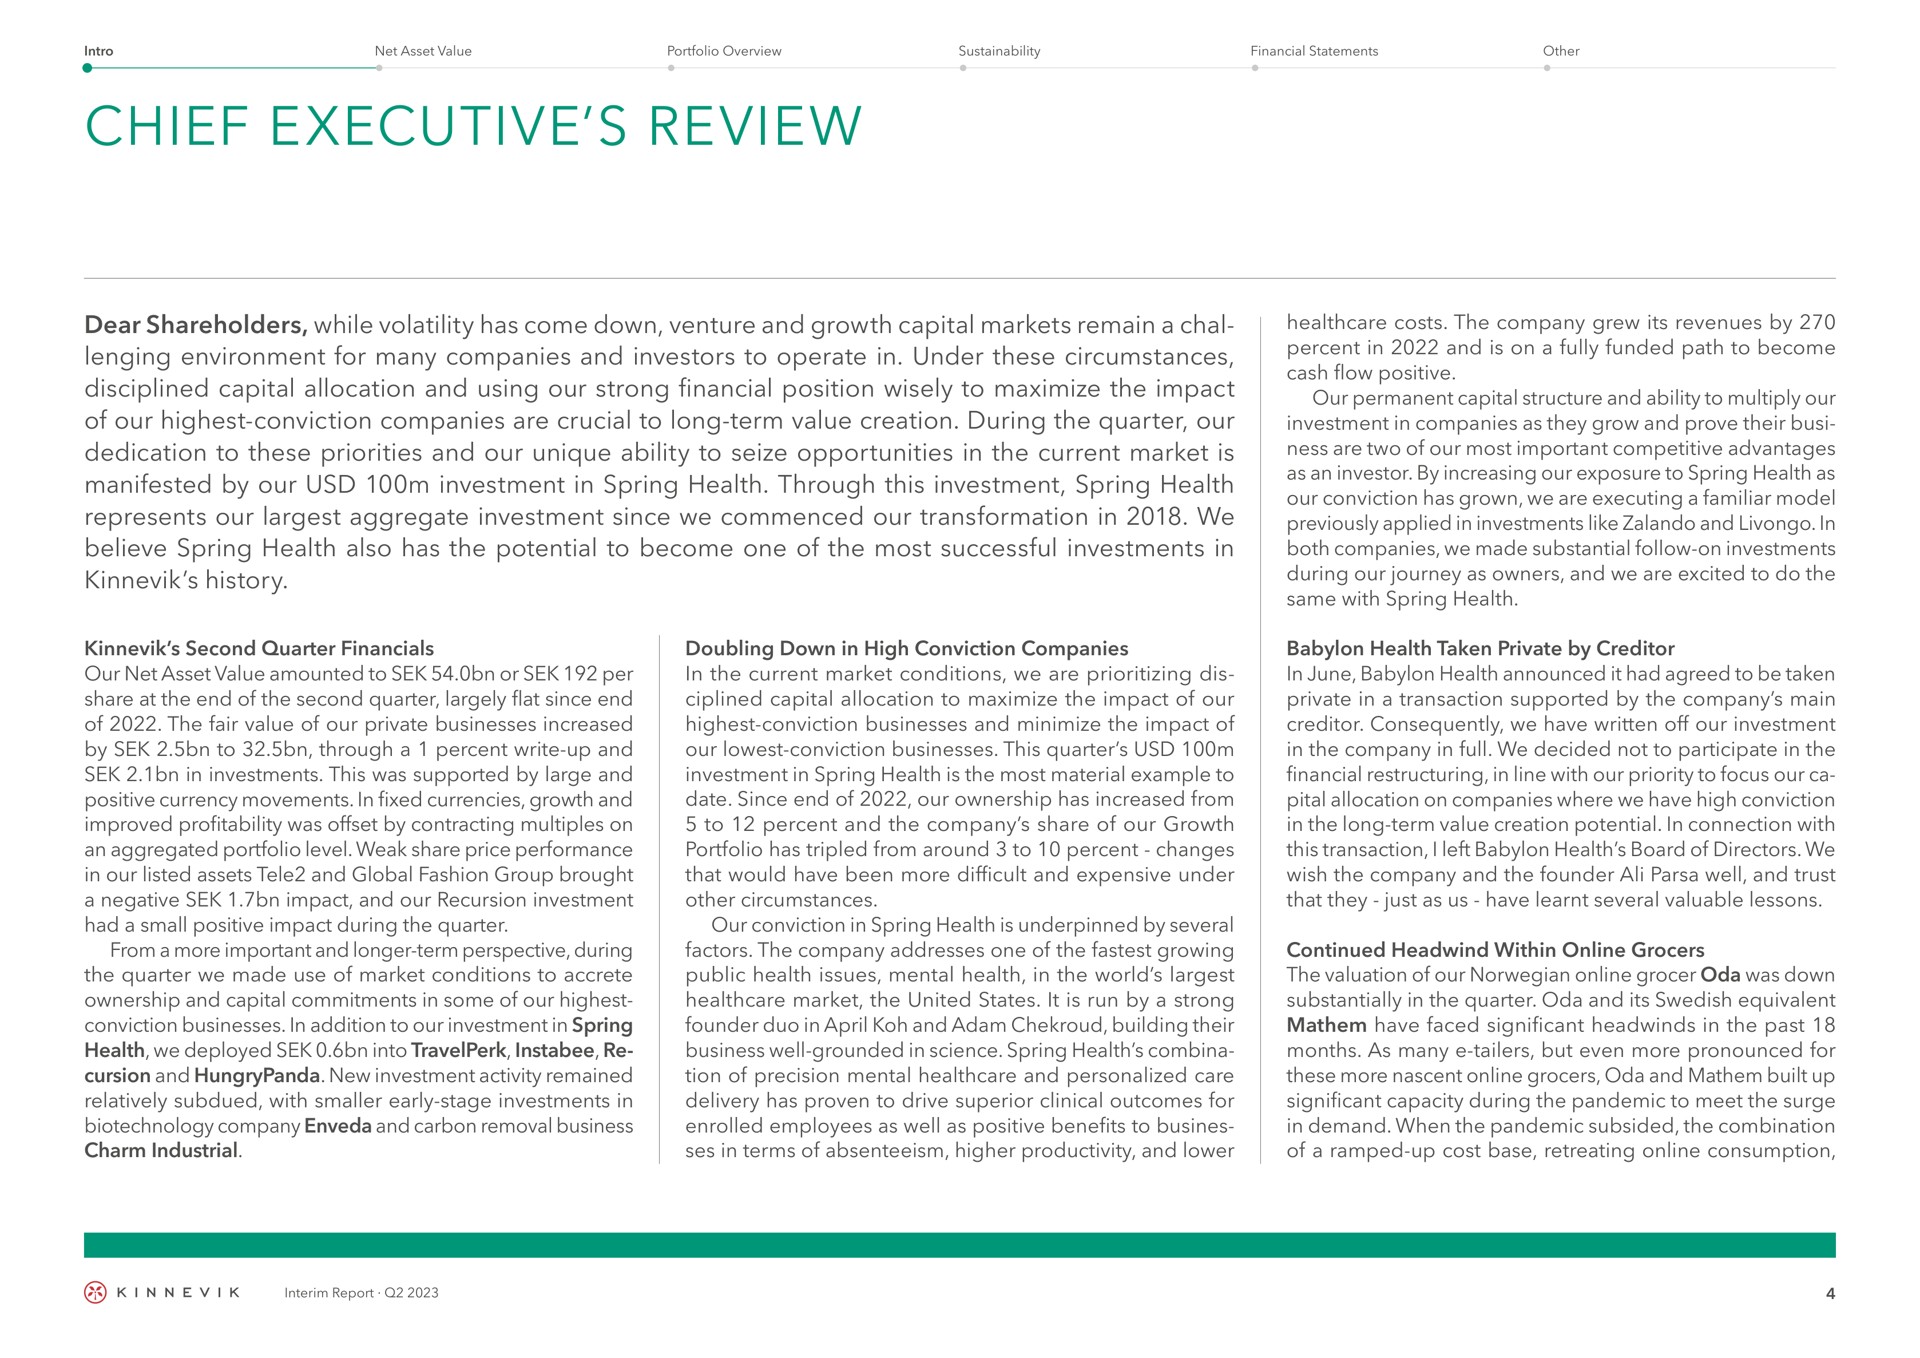 chief executive review dear shareholders while volatility has come down venture and growth capital markets remain a chal environment for many companies and investors to operate in under these circumstances disciplined capital allocation and using our strong financial position wisely to maximize the impact of our highest conviction companies are crucial to long term value creation during the quarter our dedication to these priorities and our unique ability to seize opportunities in the current market is manifested by our investment in spring health through this investment spring health represents our aggregate investment since we commenced our transformation in we believe spring health also has the potential to become one of the most successful investments in history second quarter our net asset value amounted to or per share at the end of the second quarter largely flat since end of the fair value of our private businesses increased by to through a percent write up and in investments this was supported by large and positive currency movements in fixed currencies growth and improved profitability was offset by contracting multiples on an aggregated portfolio level weak share price performance in our listed assets tele and global fashion group brought a negative impact and our recursion investment had a small positive impact during the quarter from a more important and longer term perspective during the quarter we made use of market conditions to accrete ownership and capital commitments in some of our highest conviction businesses in addition to our investment in spring health we deployed into and new investment activity remained relatively subdued with smaller early stage investments in company and carbon removal business charm industrial doubling down in high conviction companies in the current market conditions we are dis capital allocation to maximize the impact of our highest conviction businesses and minimize the impact of our conviction businesses this quarter investment in spring health is the most material example to date since end of our ownership has increased from to percent and the company share of our growth portfolio has tripled from around to percent changes that would have been more difficult and expensive under other circumstances our conviction in spring health is underpinned by several factors the company addresses one of the growing public health issues mental health in the world market the united states it is run by a strong founder duo in and building their business well grounded in science spring health of precision mental and personalized care delivery has proven to drive superior clinical outcomes for enrolled employees as well as positive benefits to ses in terms of absenteeism higher productivity and lower costs the company grew its revenues by percent in and is on a fully funded path to become cash flow positive our permanent capital structure and ability to multiply our investment in companies as they grow and prove their ness are two of our most important competitive advantages as an investor by increasing our exposure to spring health as our conviction has grown we are executing a familiar model previously applied in investments like and in both companies we made substantial follow on investments during our journey as owners and we are excited to do the same with spring health health taken private by creditor in june health announced it had agreed to be taken private in a transaction supported by the company main creditor consequently we have written off our investment in the company in full we decided not to participate in the financial in line with our priority to focus our allocation on companies where we have high conviction in the long term value creation potential in connection with this transaction i left health board of directors we wish the company and the founder well and trust that they just as us have learnt several valuable lessons continued within grocers the valuation of our grocer oda was down substantially in the quarter oda and its equivalent have faced significant in the past months as many but even more pronounced for these more nascent grocers oda and built up significant capacity during the pandemic to meet the surge in demand when the pandemic subsided the combination of a ramped up cost base retreating consumption | Kinnevik